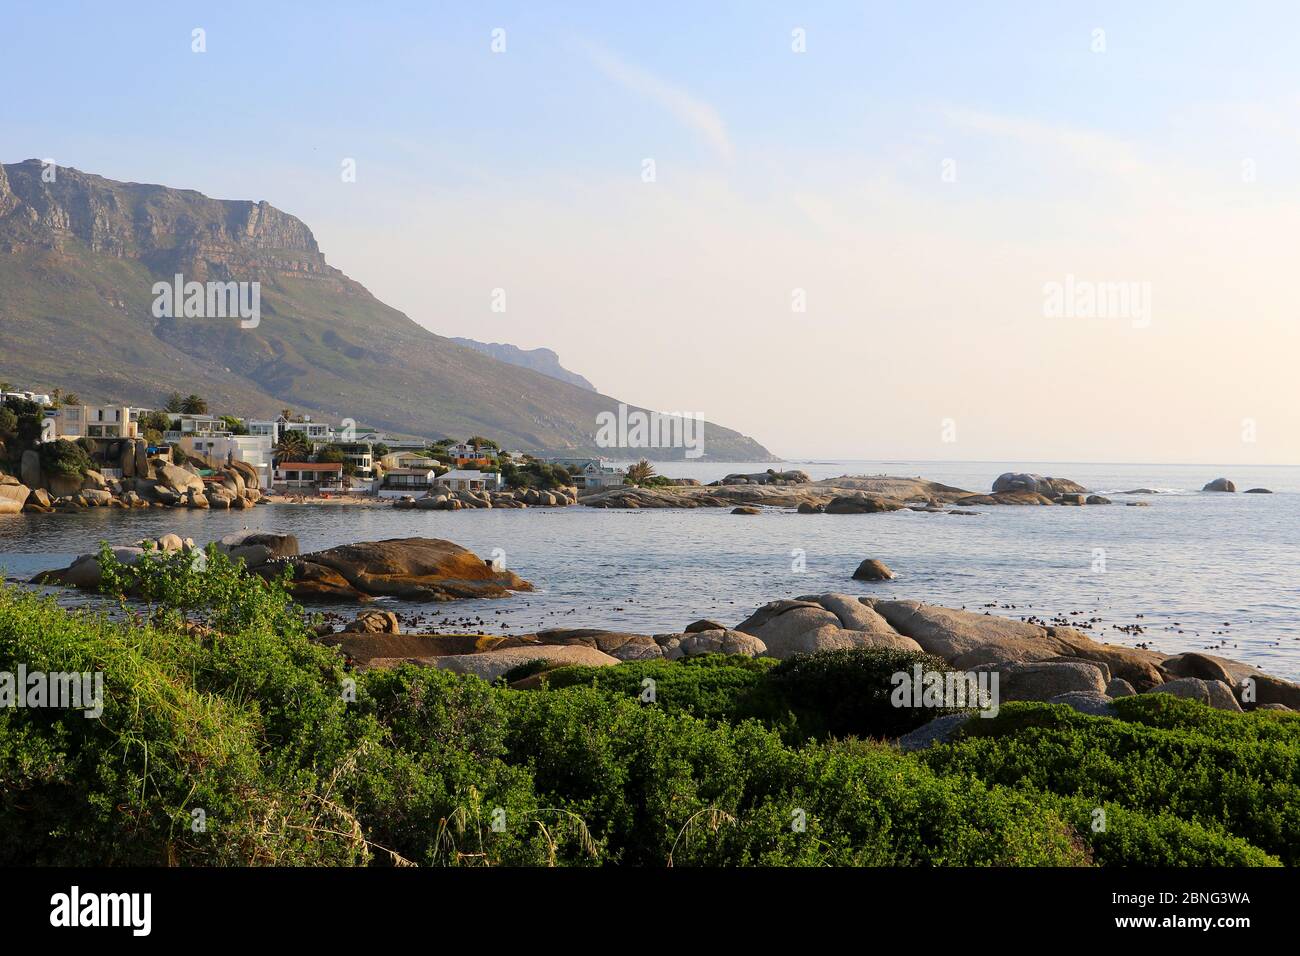 Property and beaches in Camps Bay, Cape Town, South Africa on a clear summers day, with people on the beach and mountains in the background Stock Photo